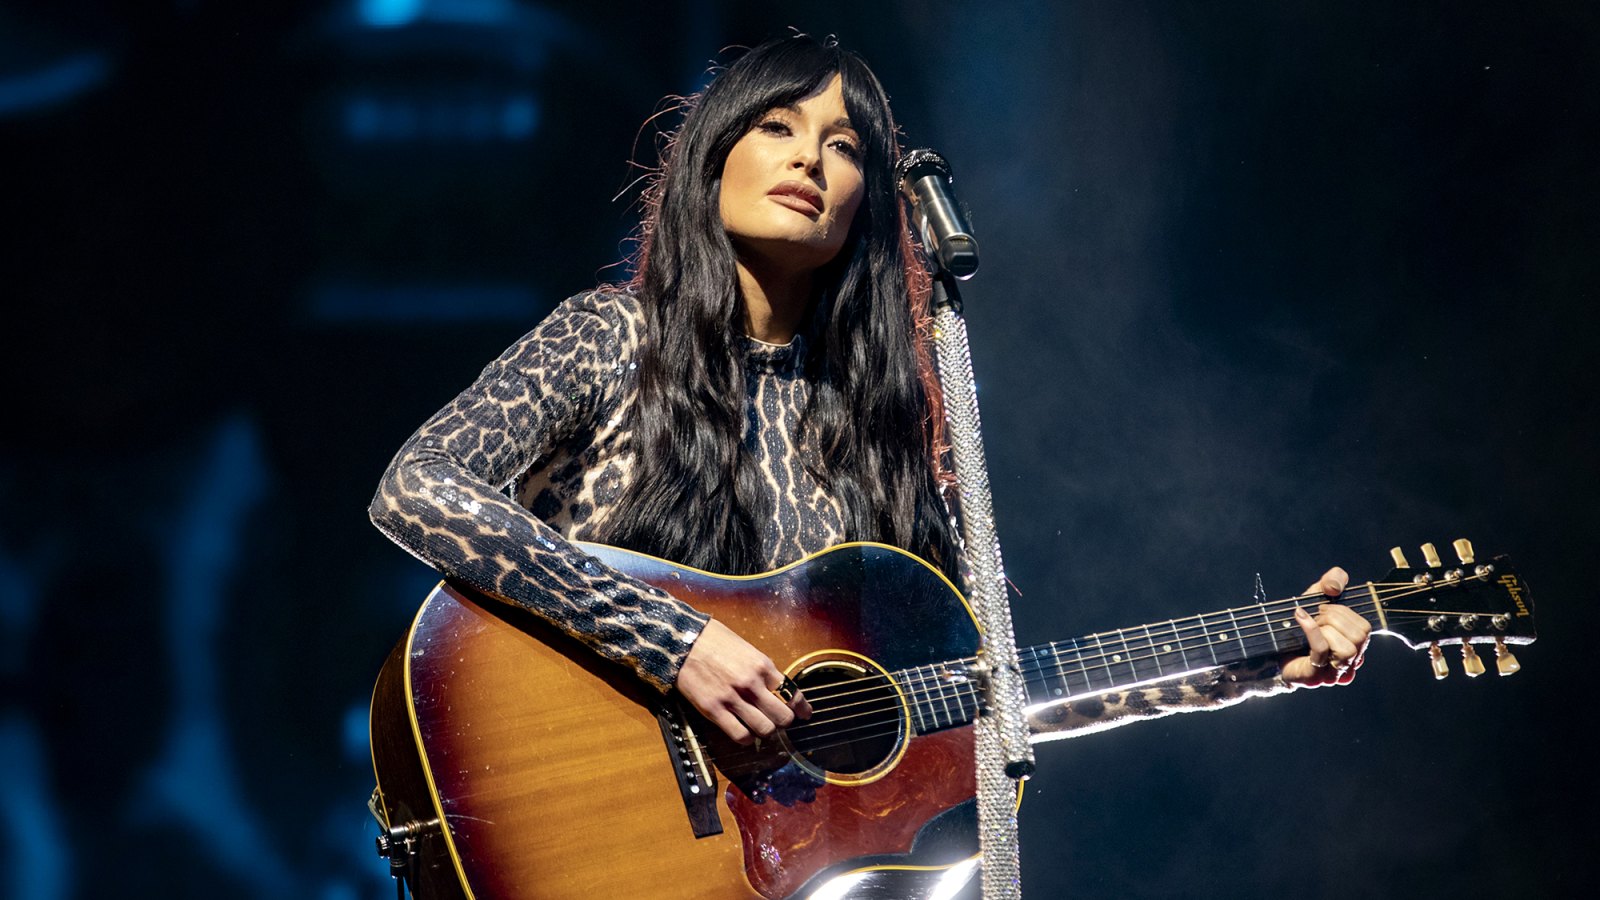 Kacey Musgraves Is ‘Extremely Sad’ That Her Final ‘Star-Crossed’ Concert Was Canceled: 'So Genuinely Sorry'